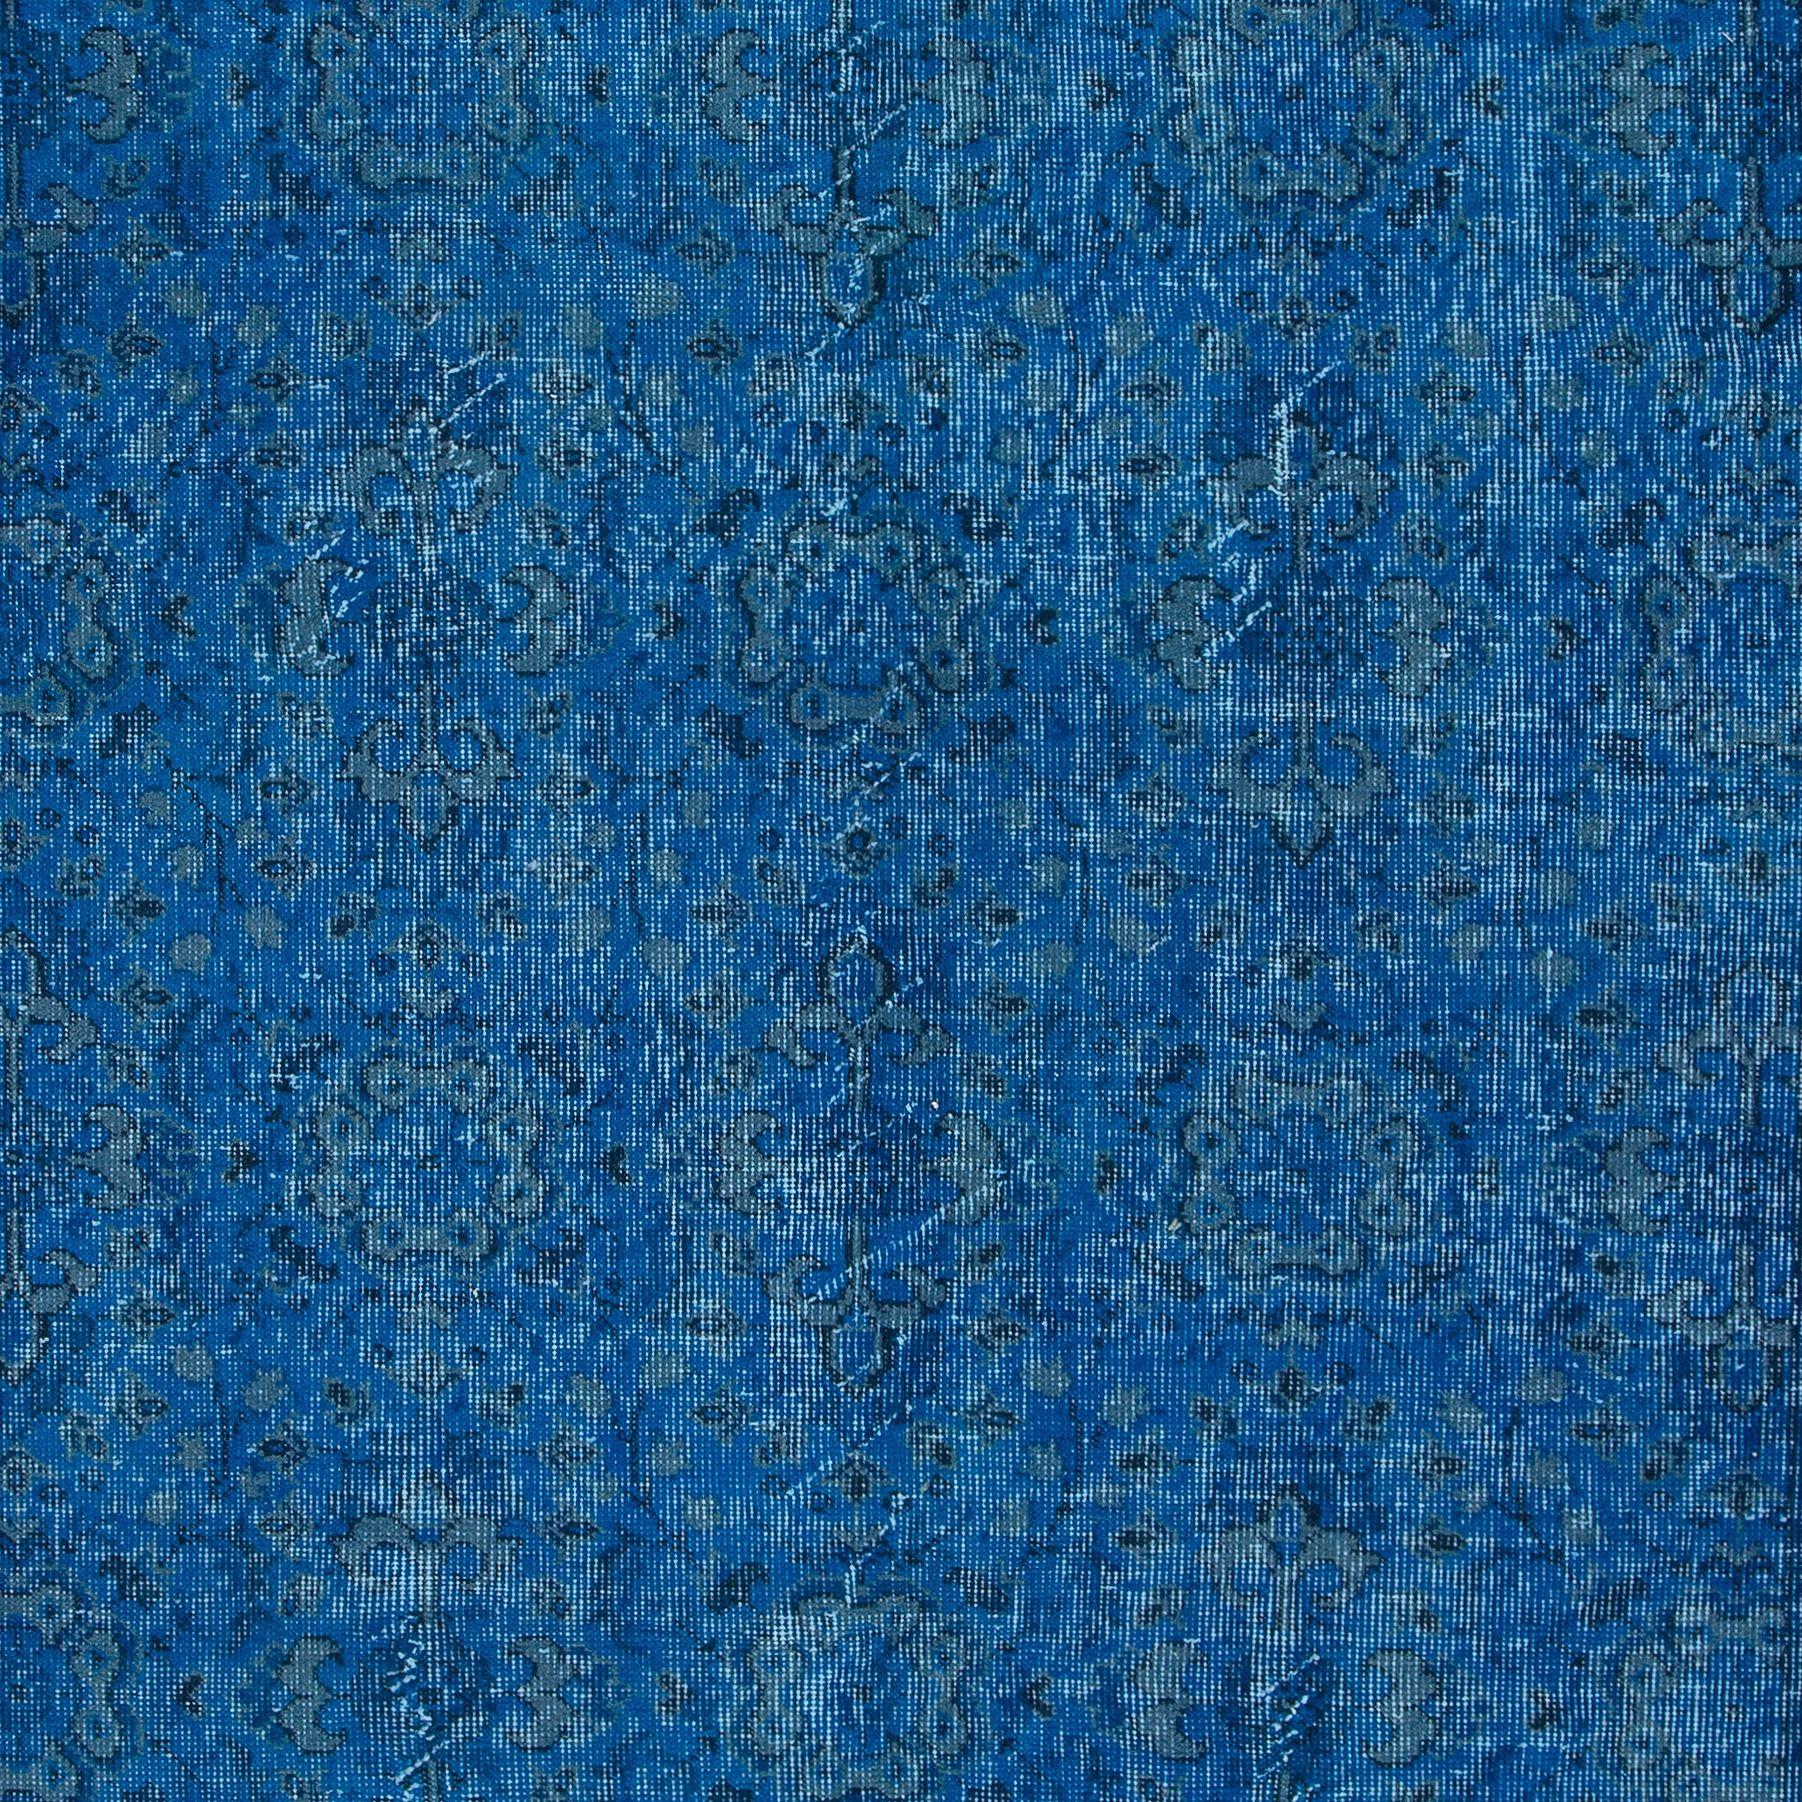 Modern 5x8.2 Ft Handmade Area Rug with in Blue Tones, Contemporary Turkish Carpet For Sale